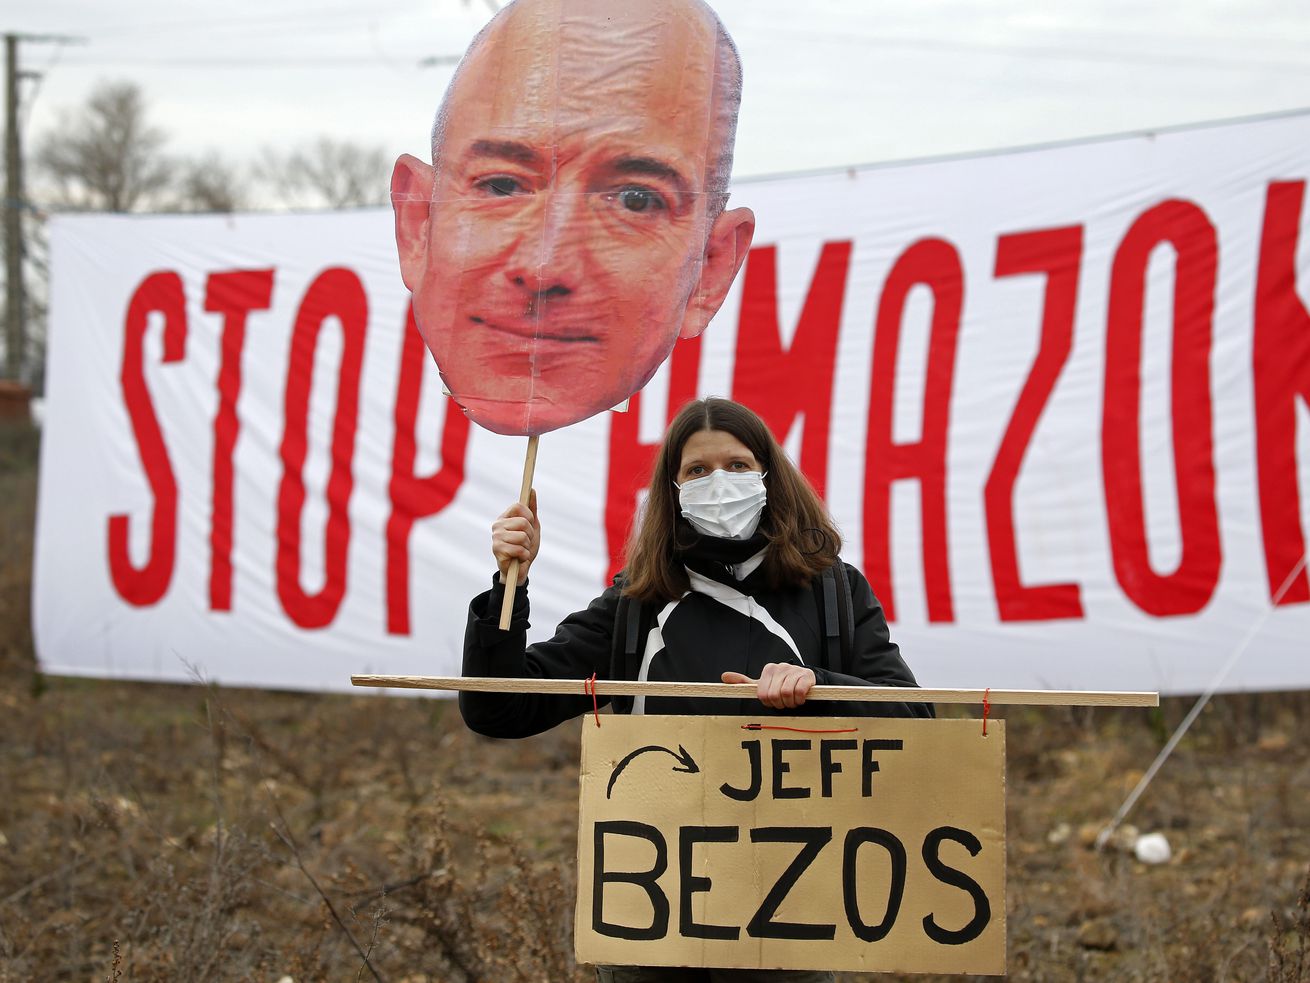 A protester holds up a large cutout of Jeff Bezos’s face while standing in front of a sign that reads “stop Amazon.”